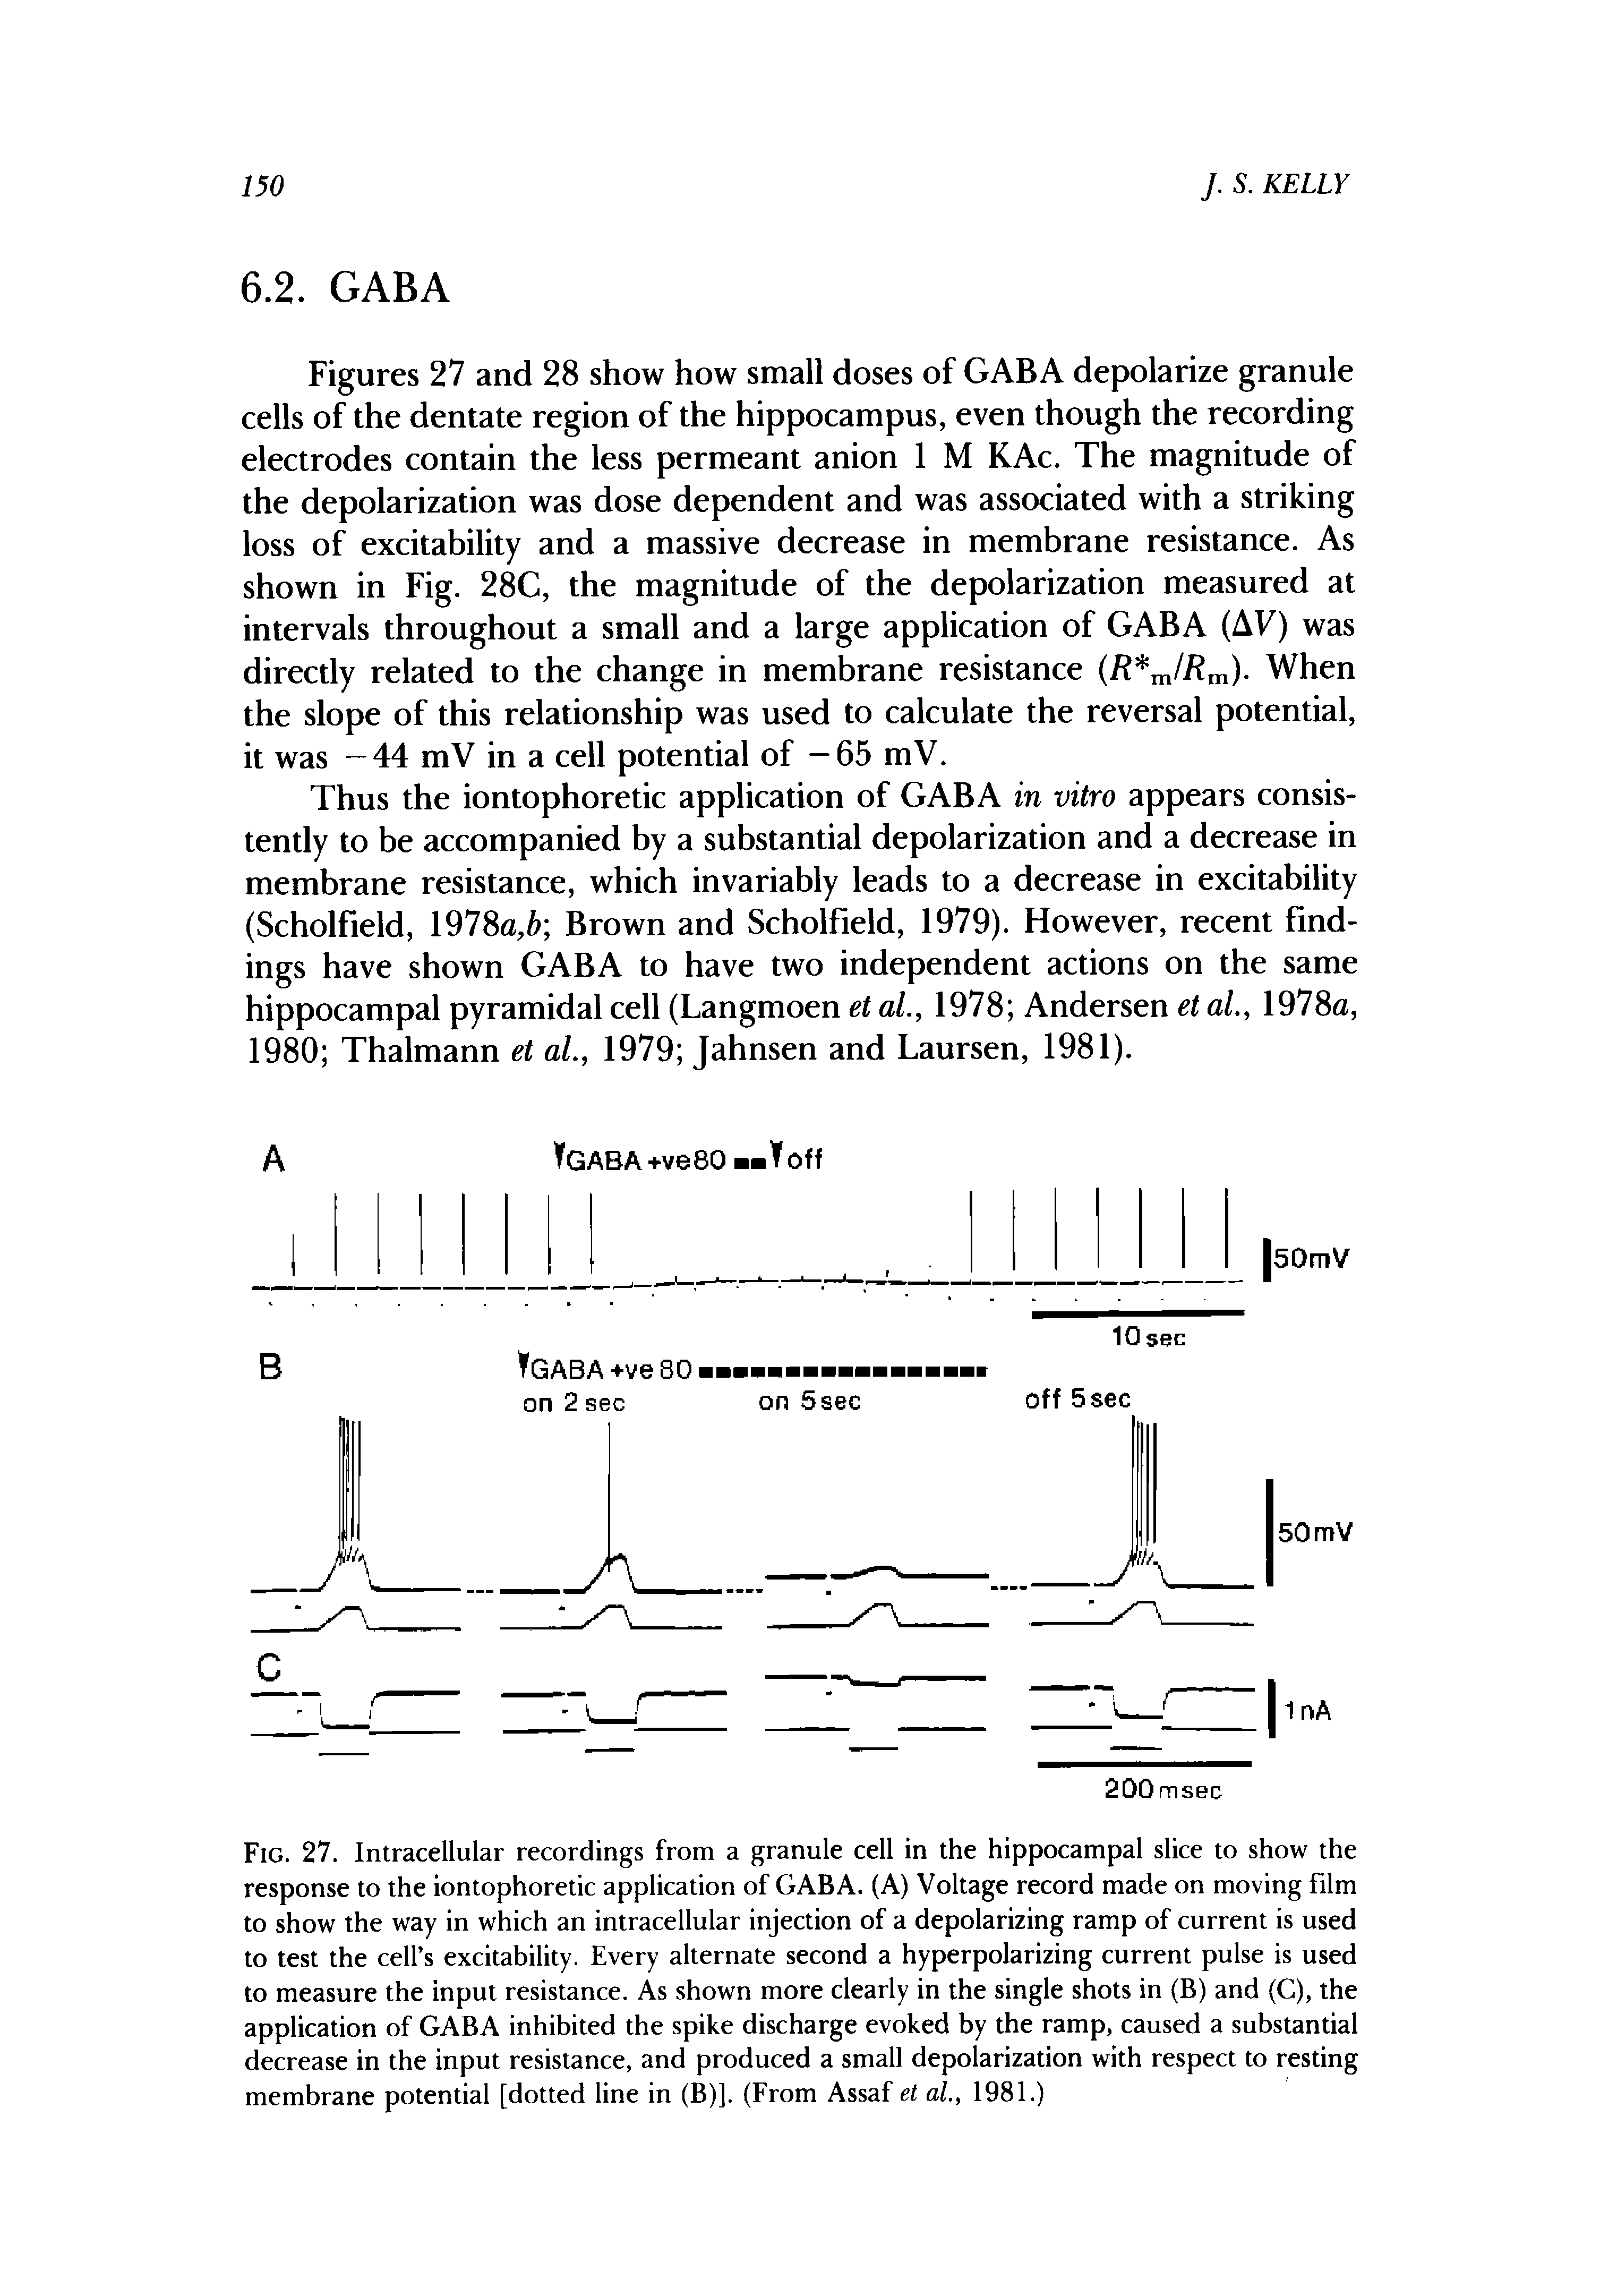 Fig. 27. Intracellular recordings from a granule cell in the hippocampal slice to show the response to the iontophoretic application of GABA. (A) Voltage record made on moving film to show the way in which an intracellular injection of a depolarizing ramp of current is used to test the cell s excitability. Every alternate second a hyperpolarizing current pulse is used to measure the input resistance. As shown more clearly in the single shots in (B) and (C), the application of GABA inhibited the spike discharge evoked by the ramp, caused a substantial decrease in the input resistance, and produced a small depolarization with respect to resting membrane potential [dotted line in (B)]. (From Assaf et ai, 1981.)...